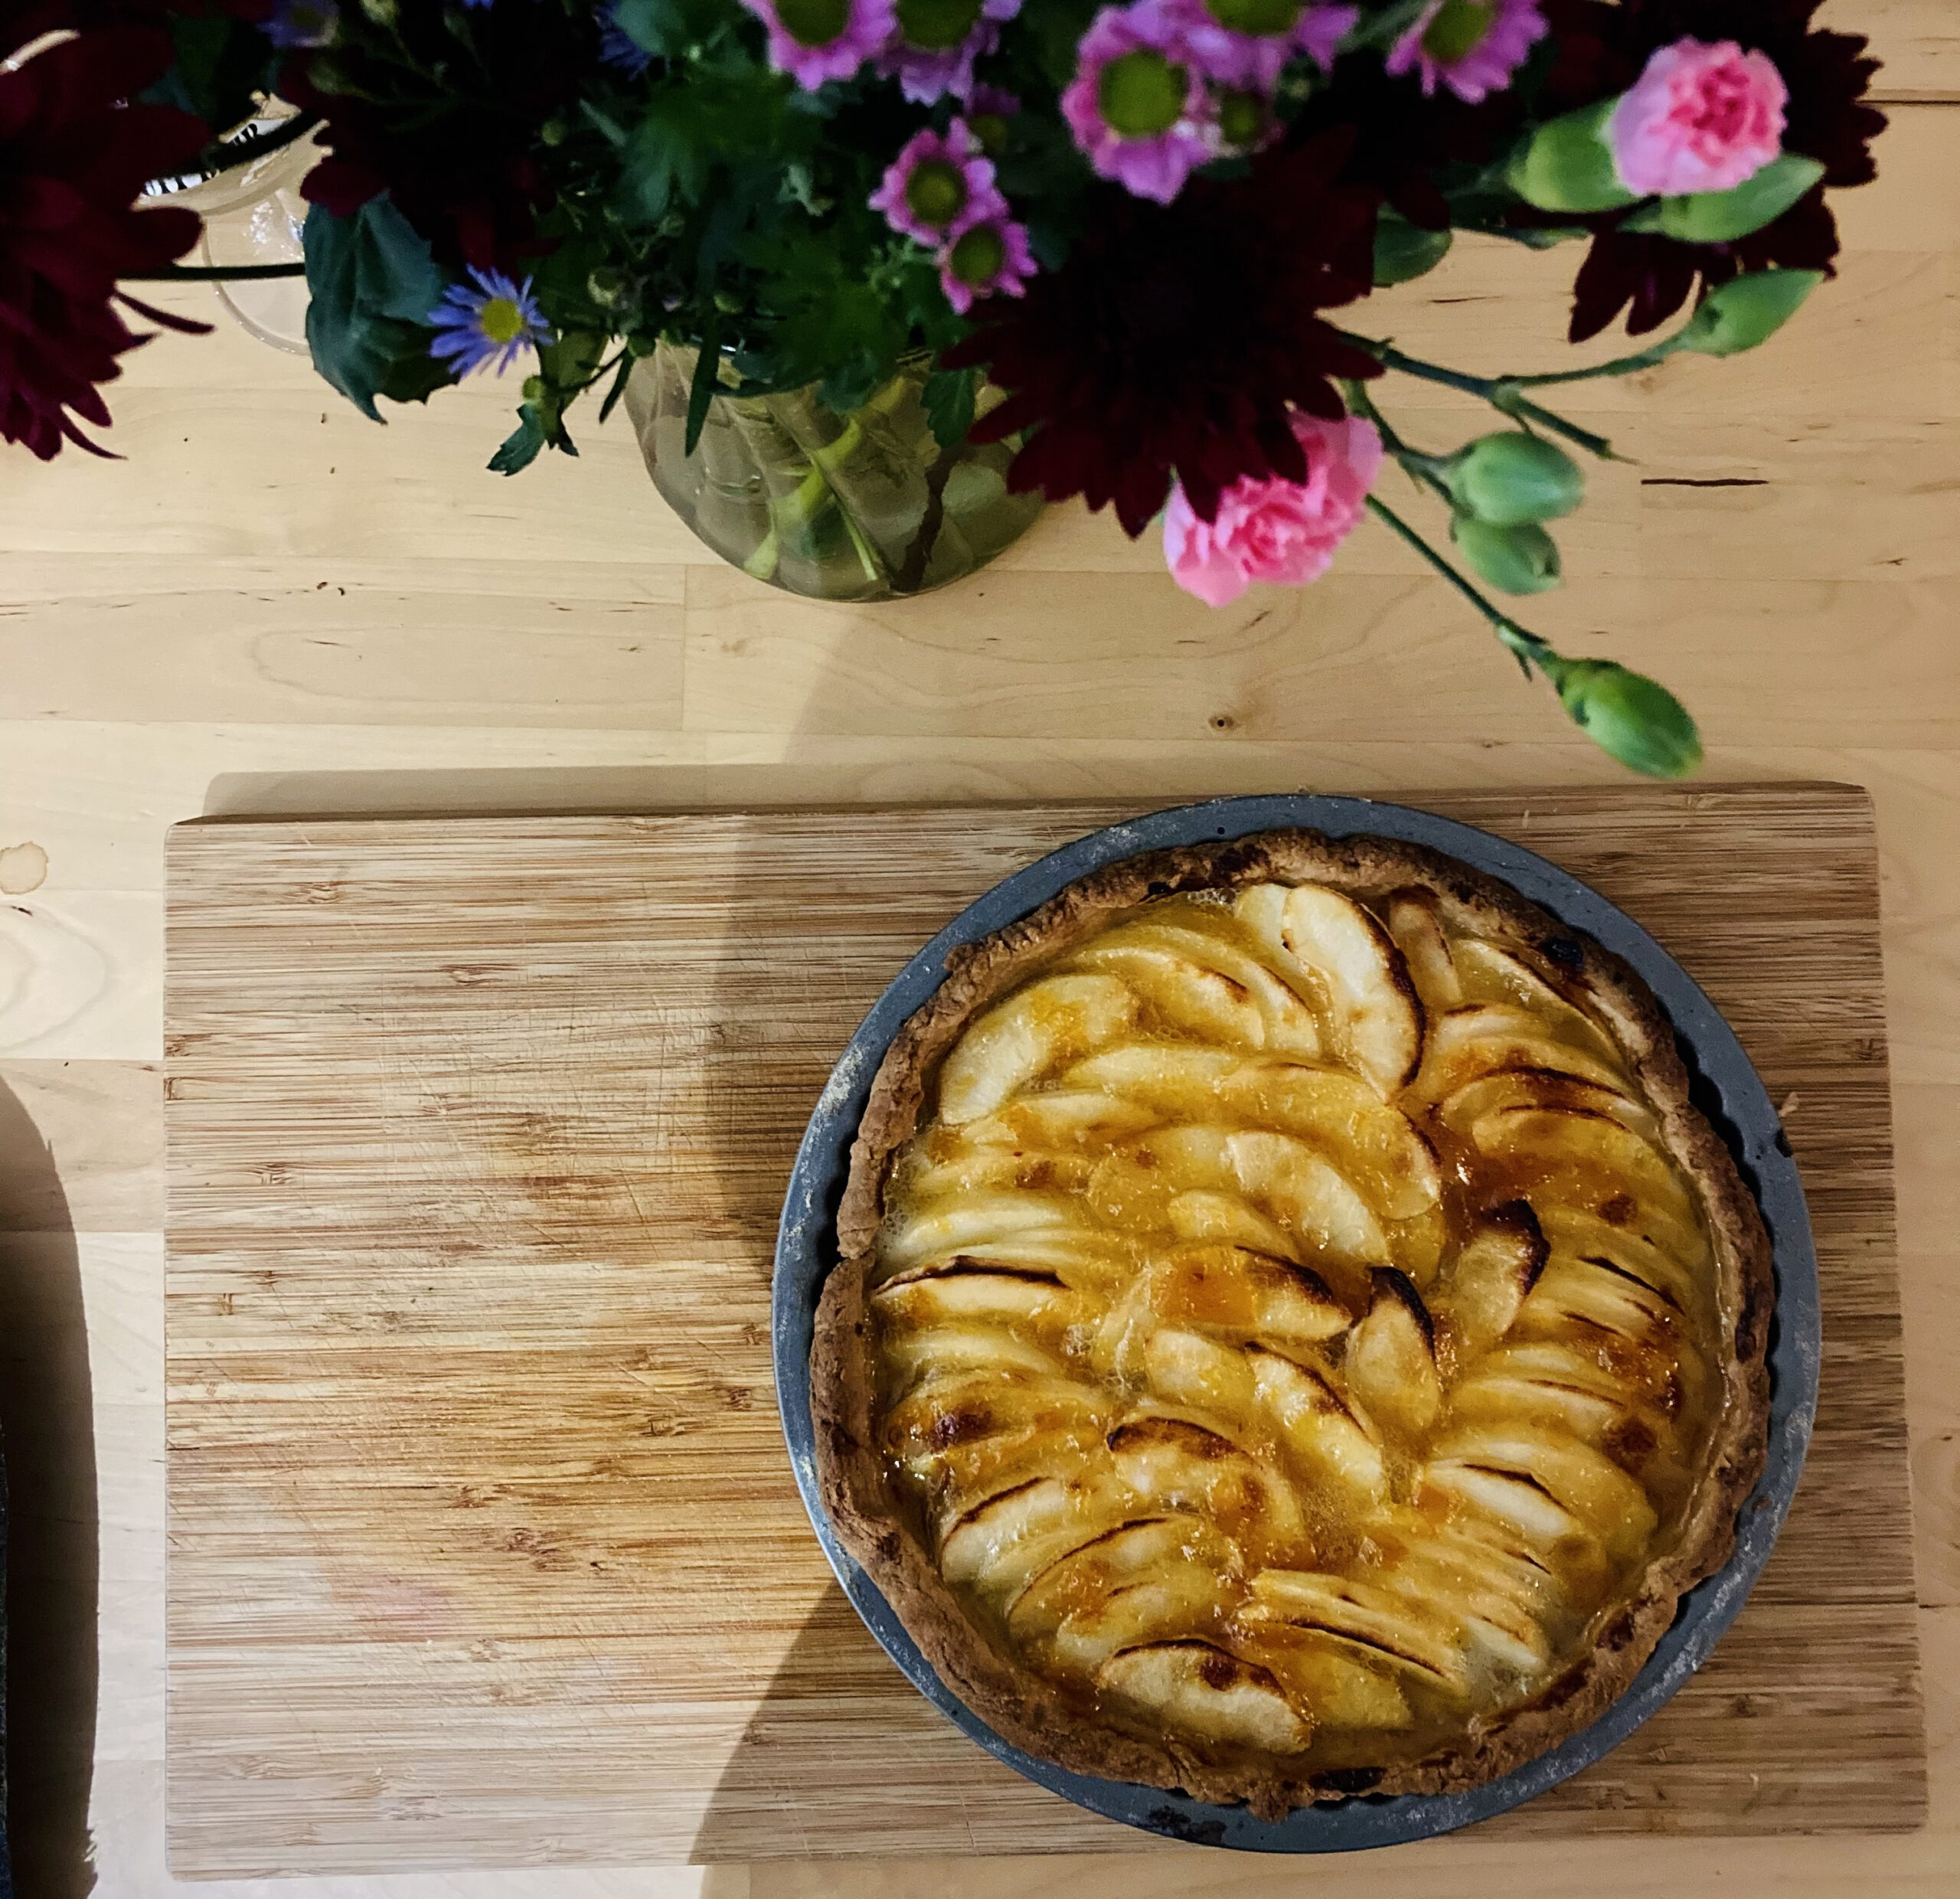 Tarte aux pommes: a pastry to unfold time by Margaux